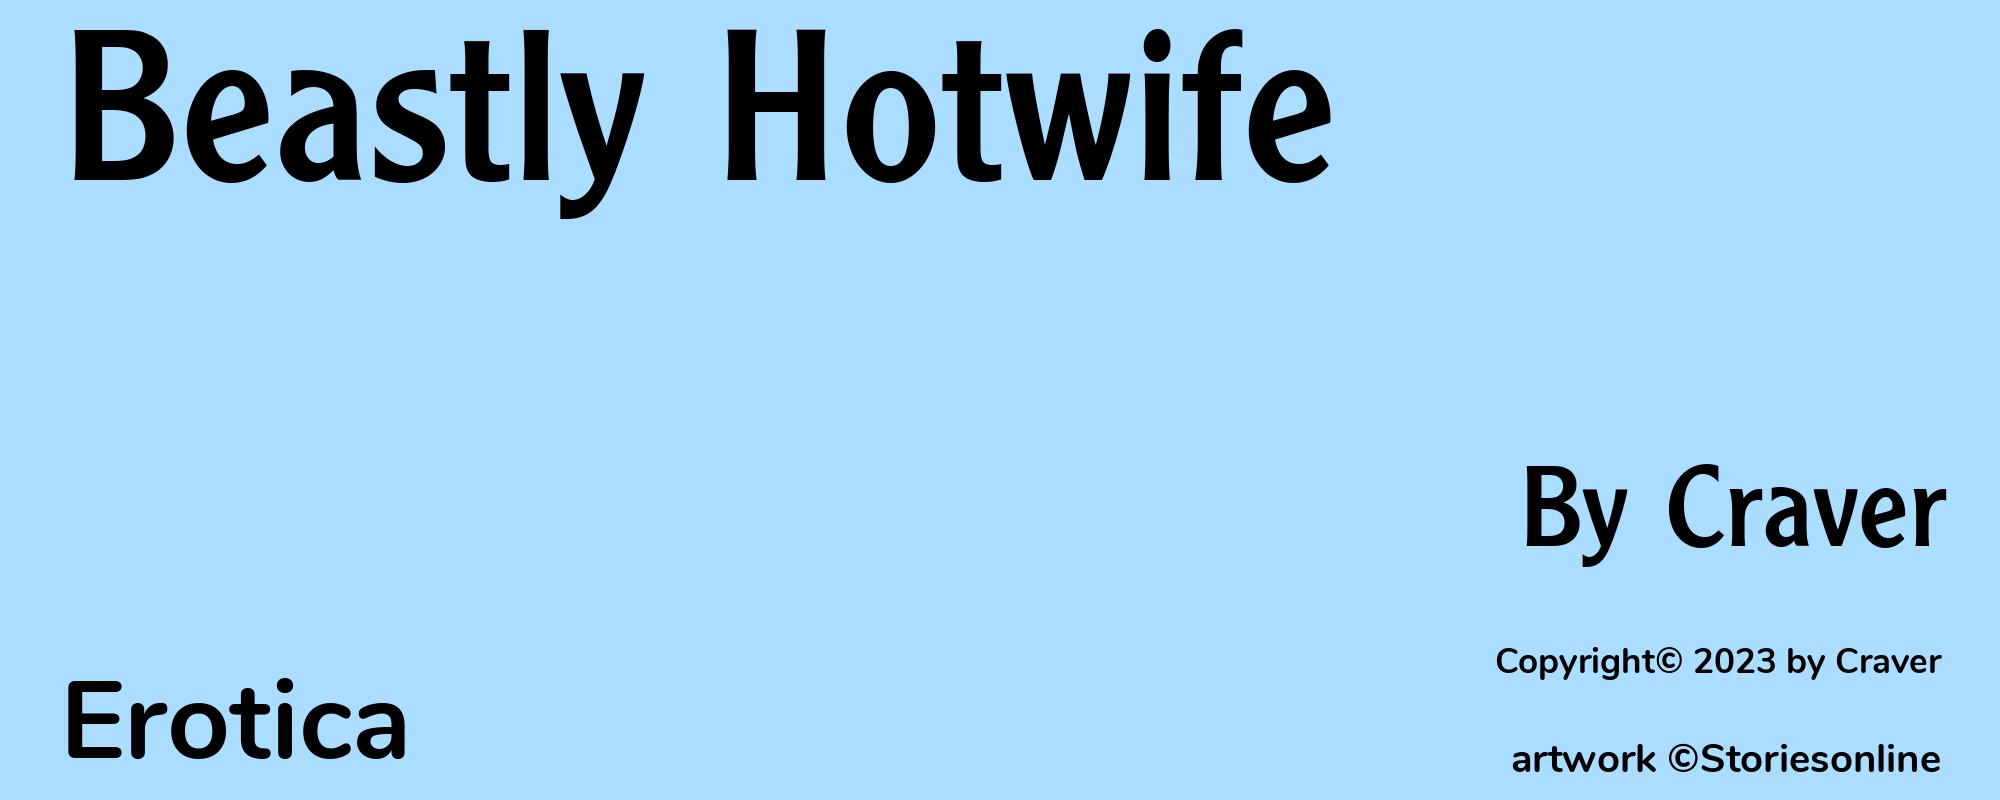 Beastly Hotwife - Cover